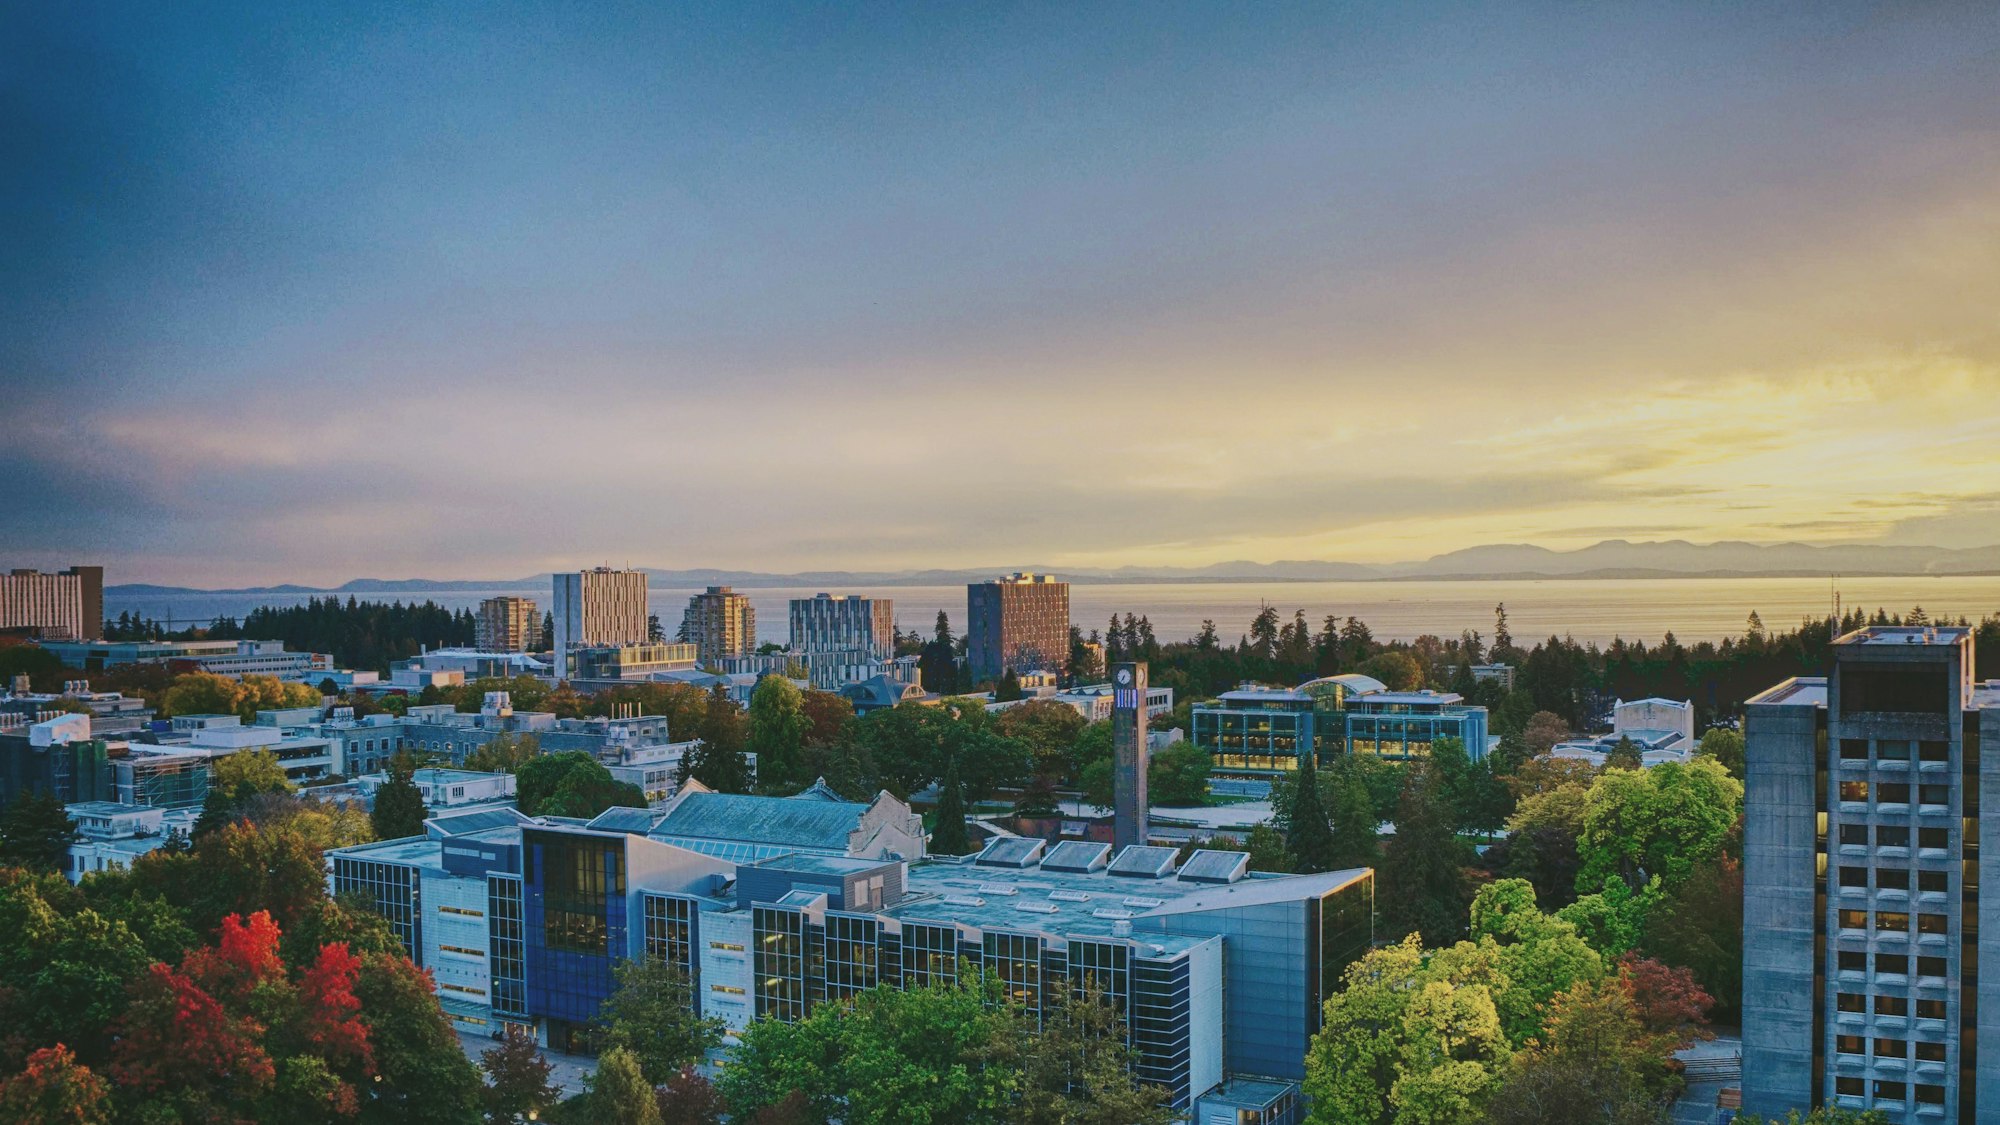 UBC campus, looking towards the Strait of Georgia. Recognizable landmarks in this image include the Irving K. Barber Learning Centre, the Ladner Clock Tower, and Koerner library.